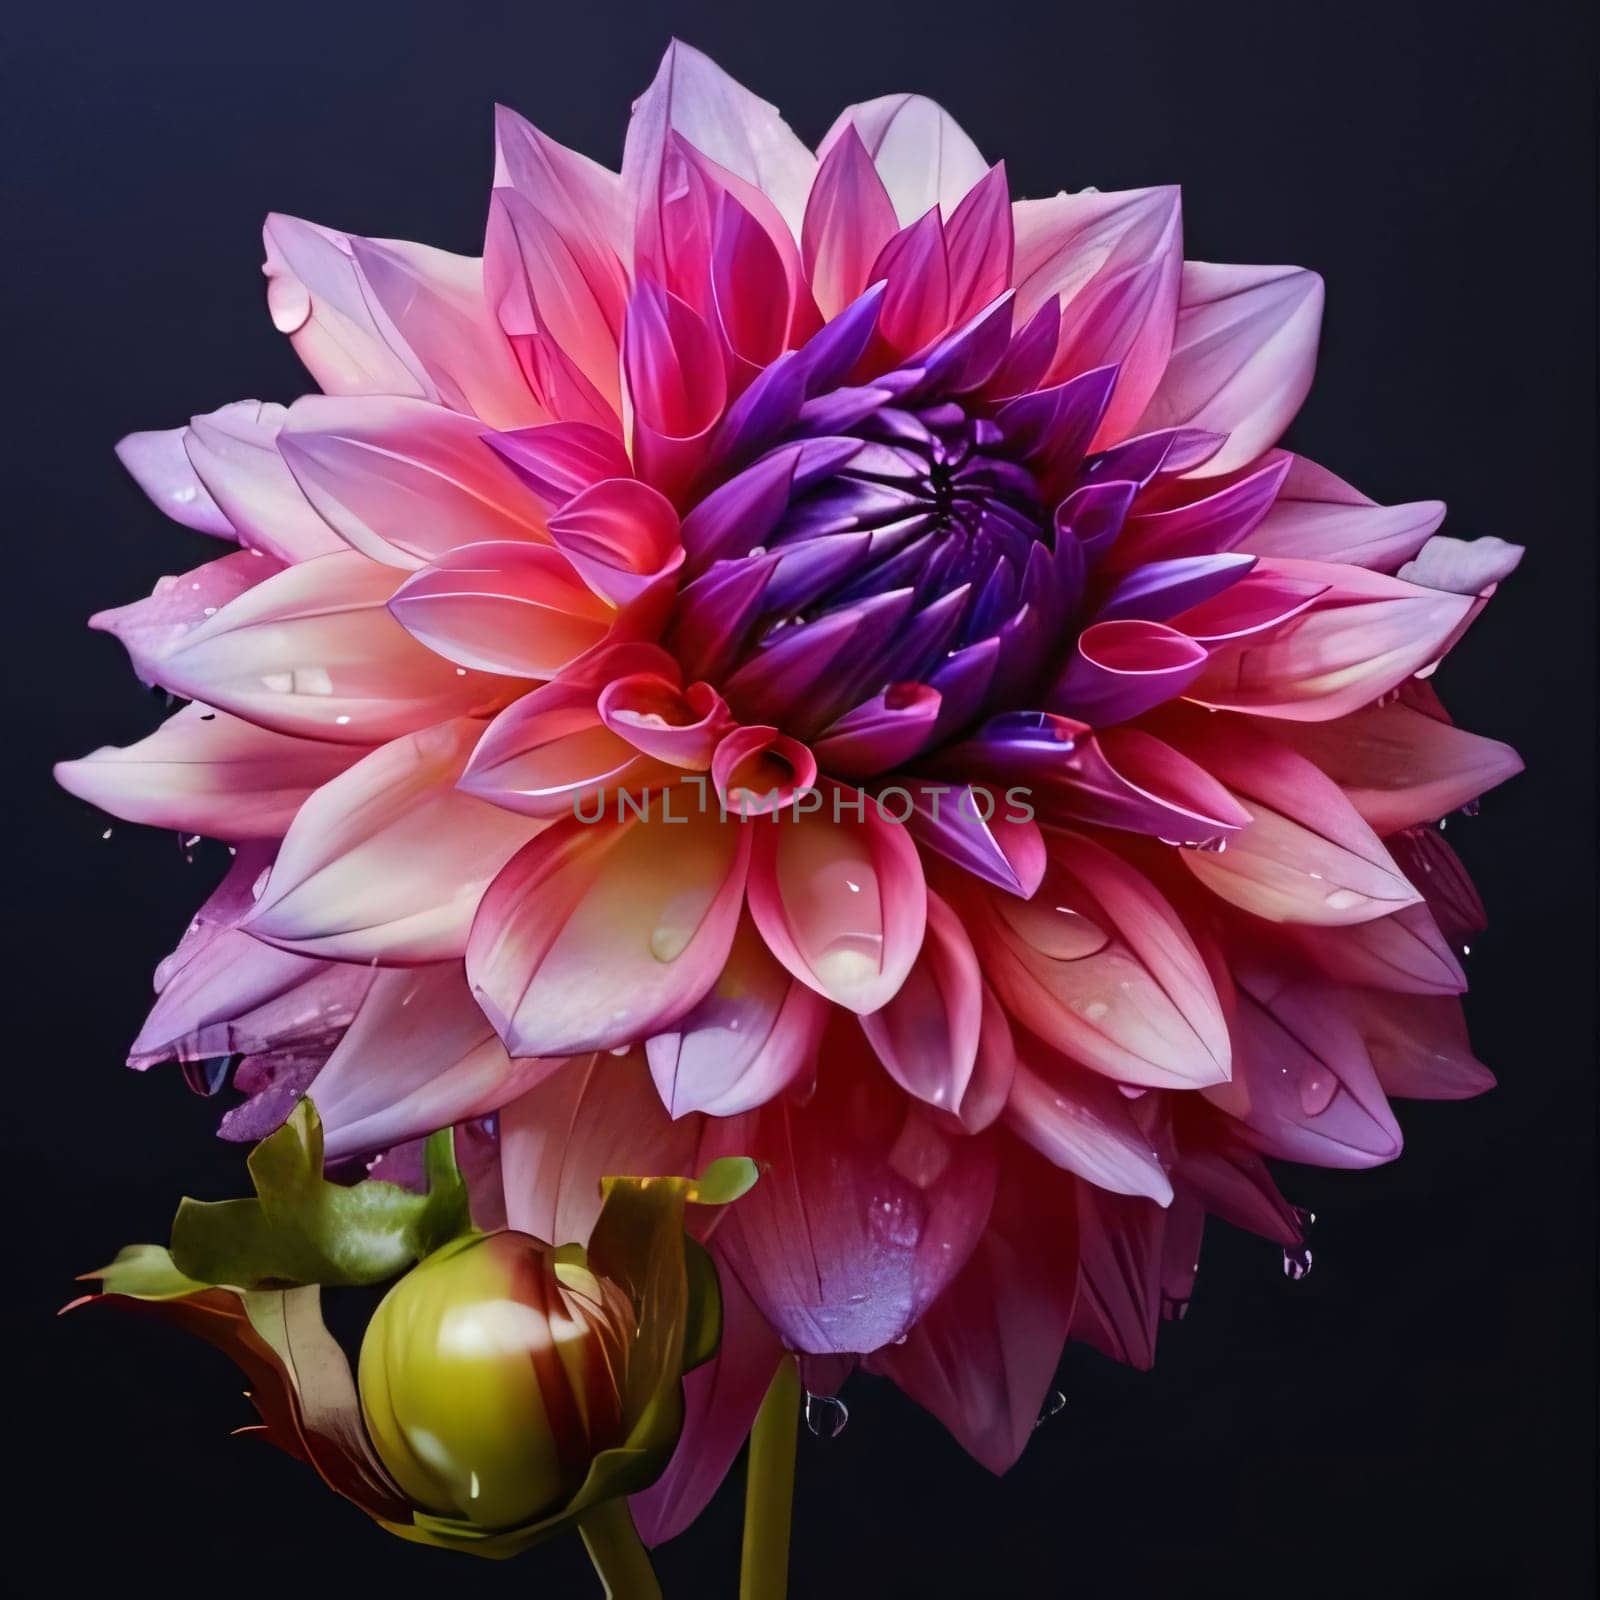 Pink dahlia flower isolated on black. Flowering flowers, a symbol of spring, new life. by ThemesS